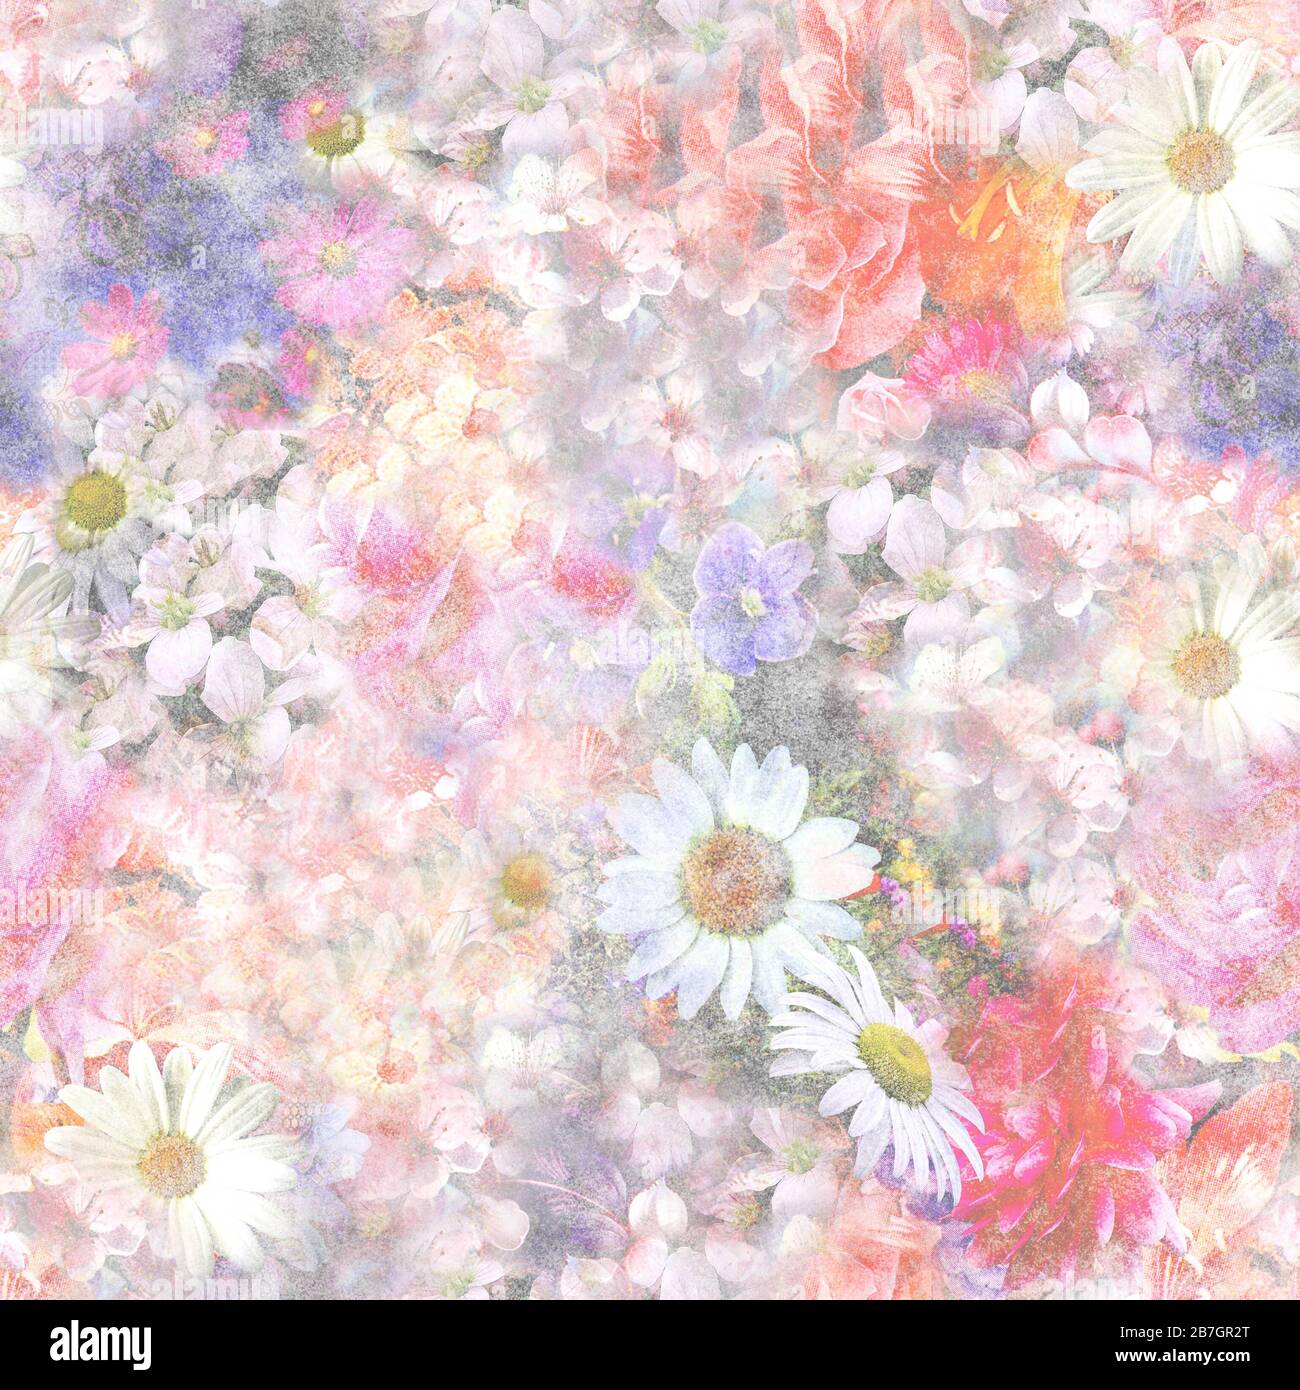 Pastel color flowers.Daisy blossom pattern for fabric or paper print. - illustration Stock Photo